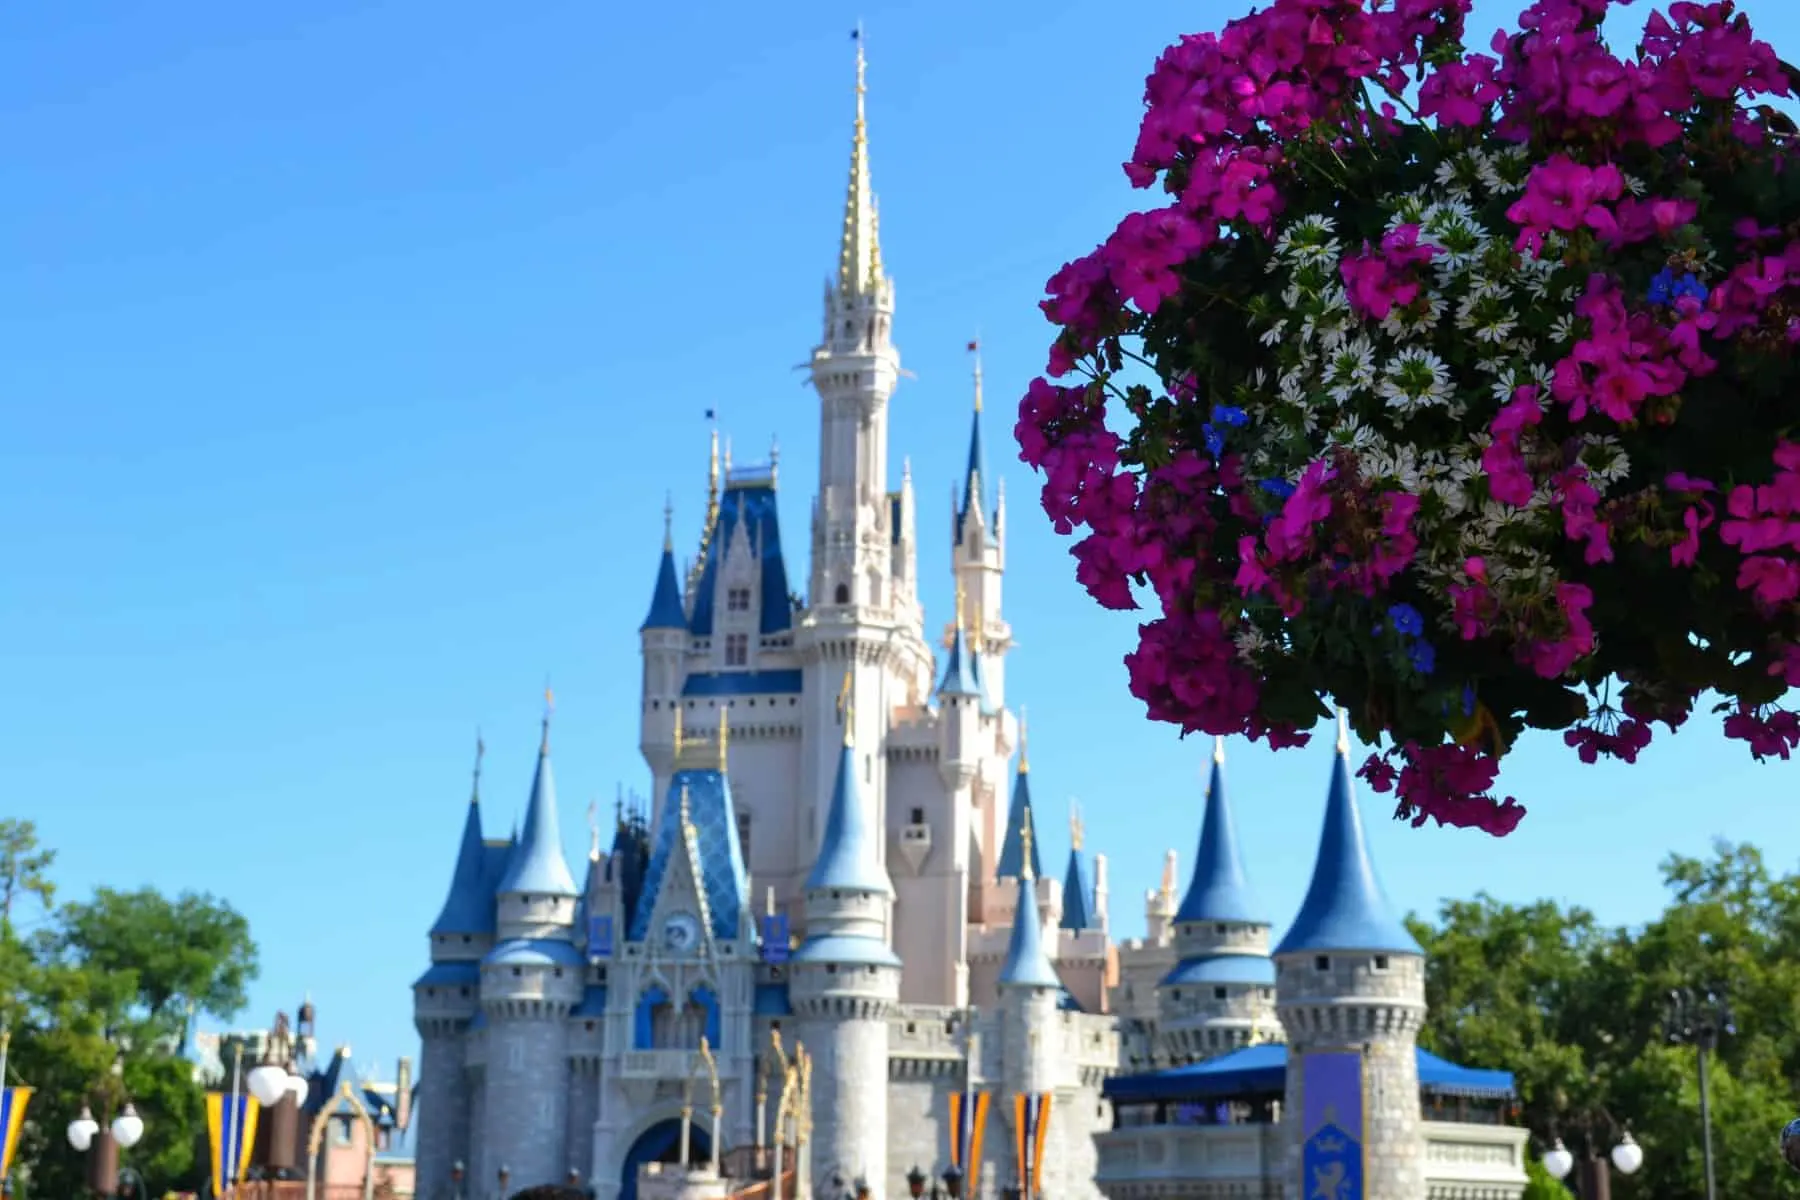 All About the Disney World Parks (tips, resources, attractions, dining, and touring guides)